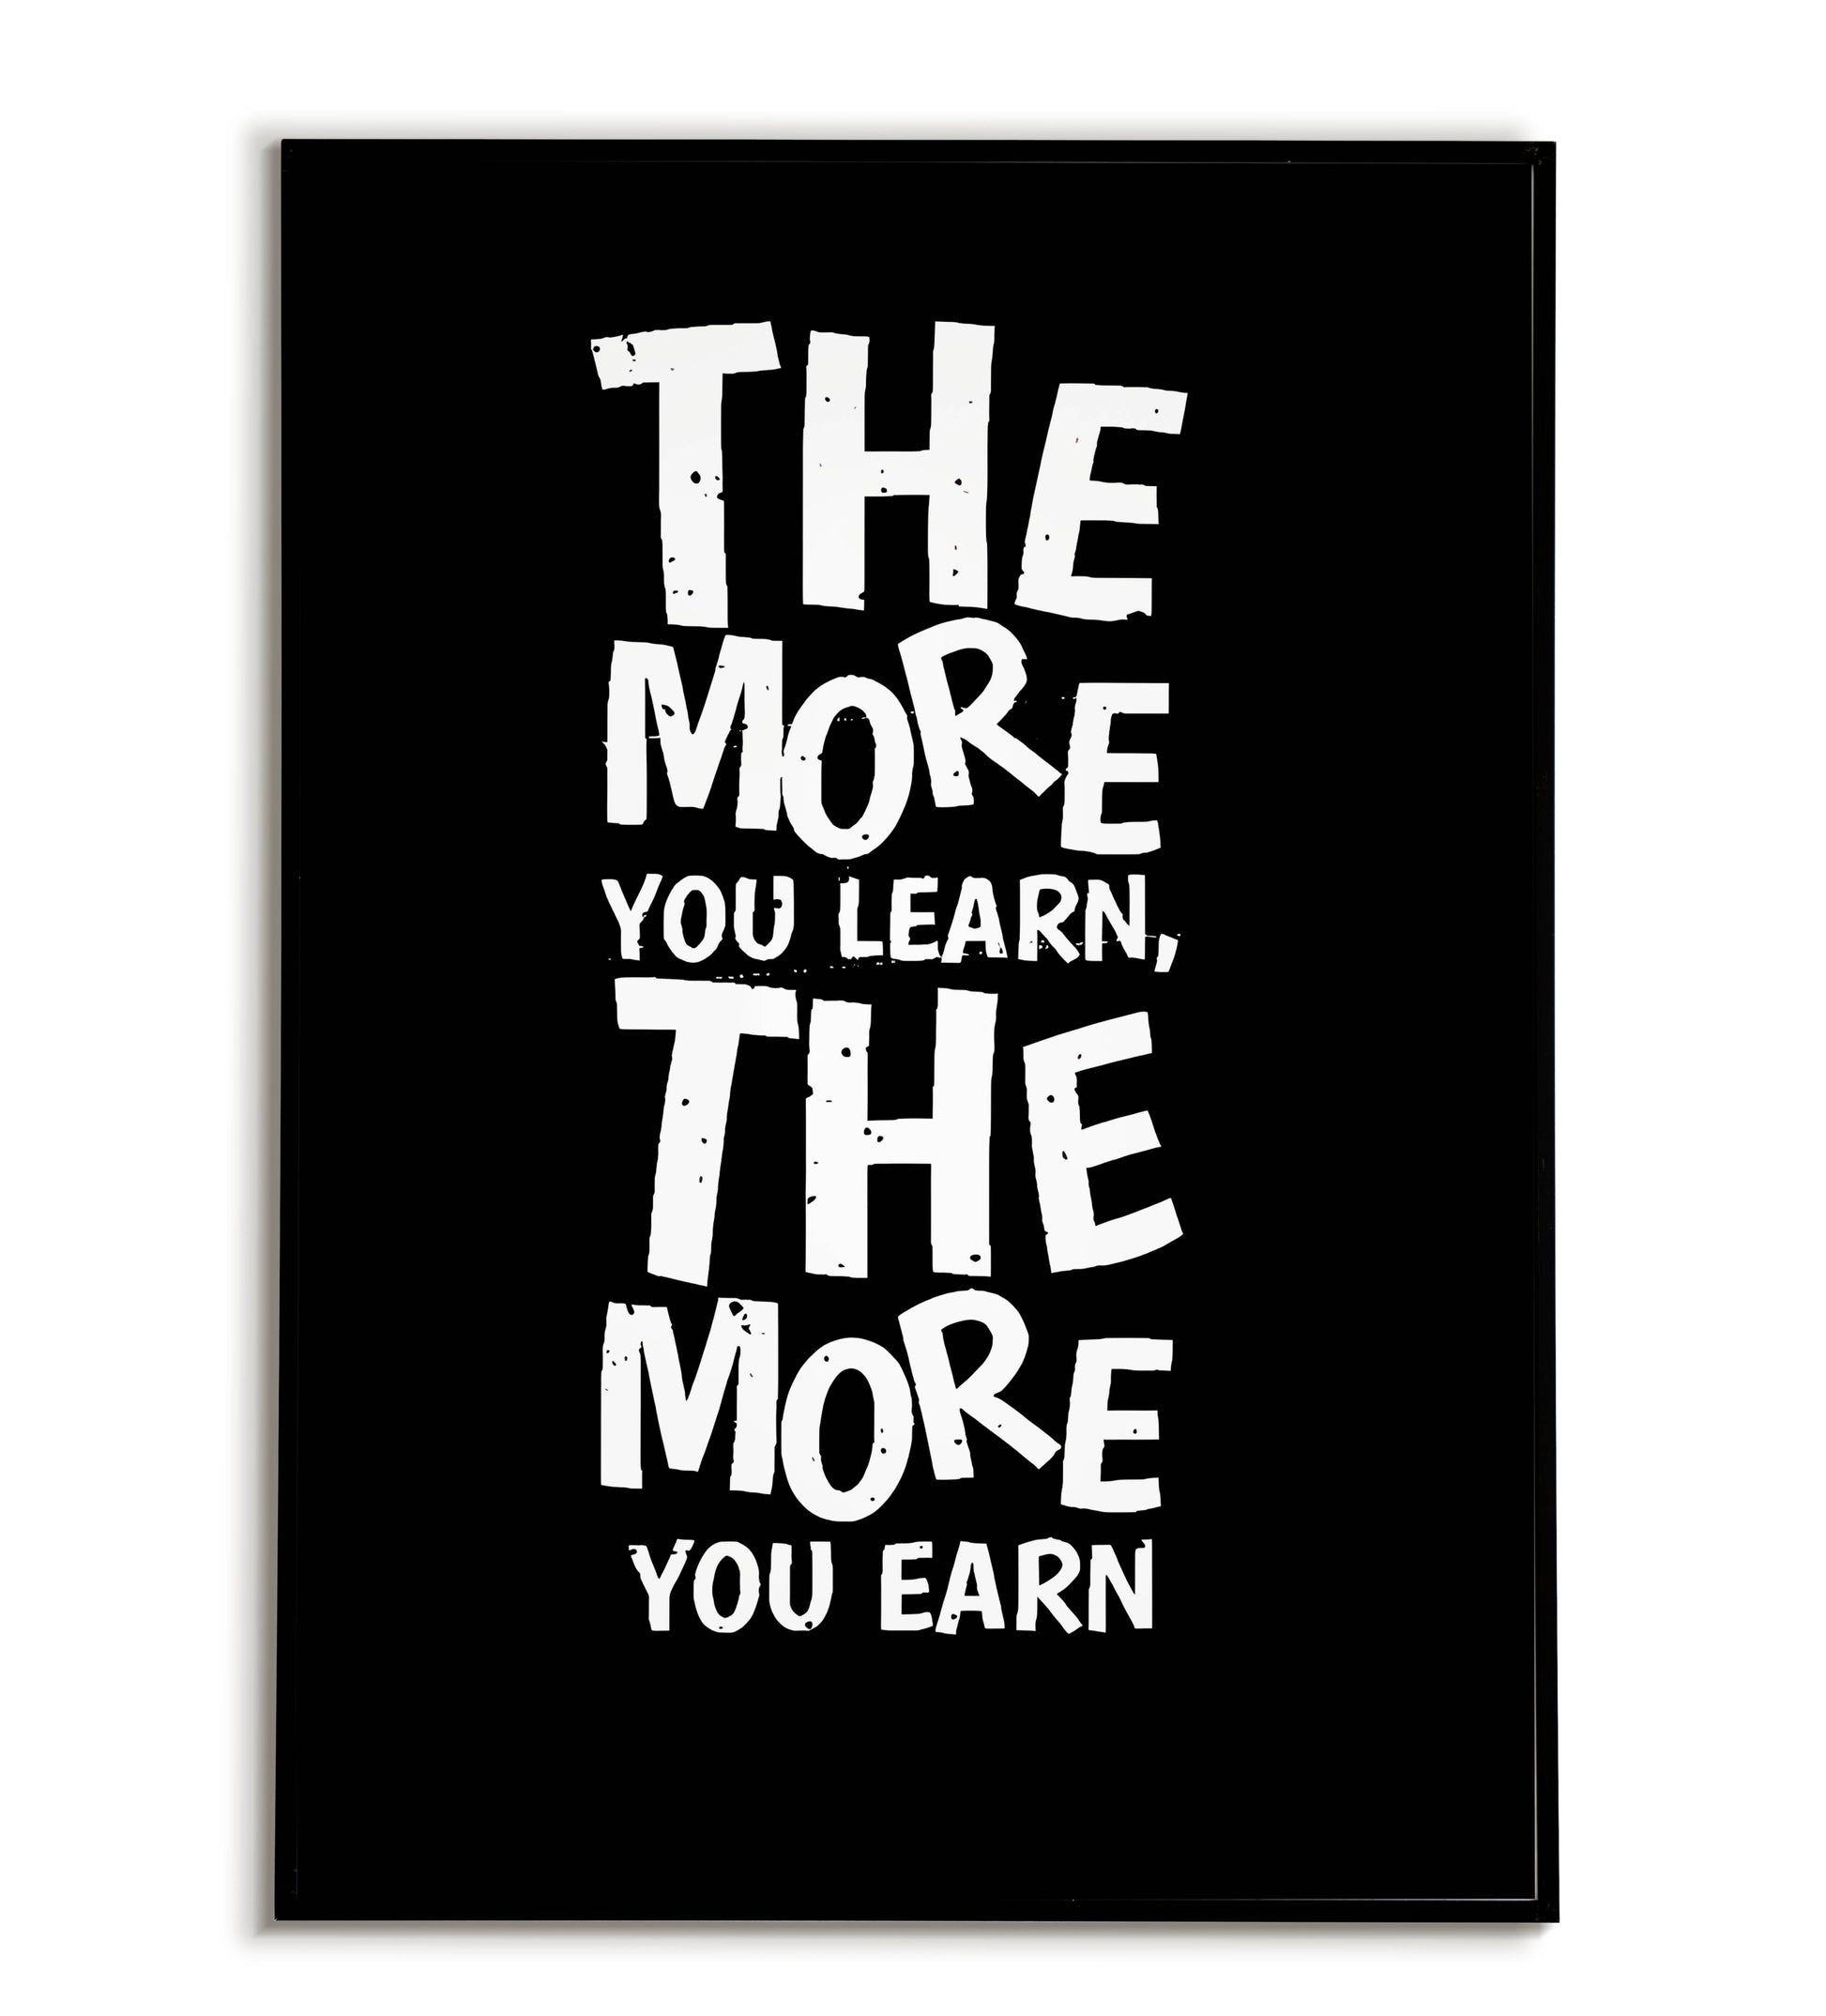 The More You Learn the More You Earn - Stay motivated with this quote reminding you of the power of knowledge.